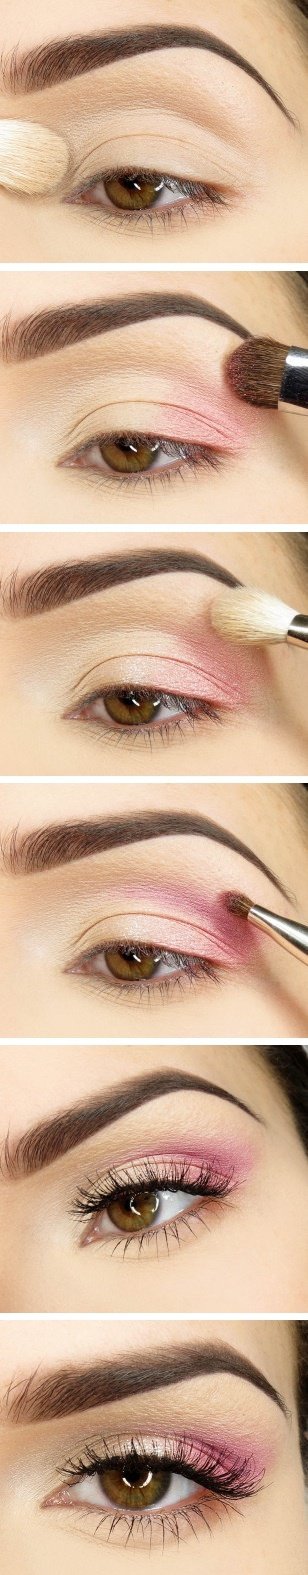 Try Pink and Yellow Eye Makeup Tutorial.